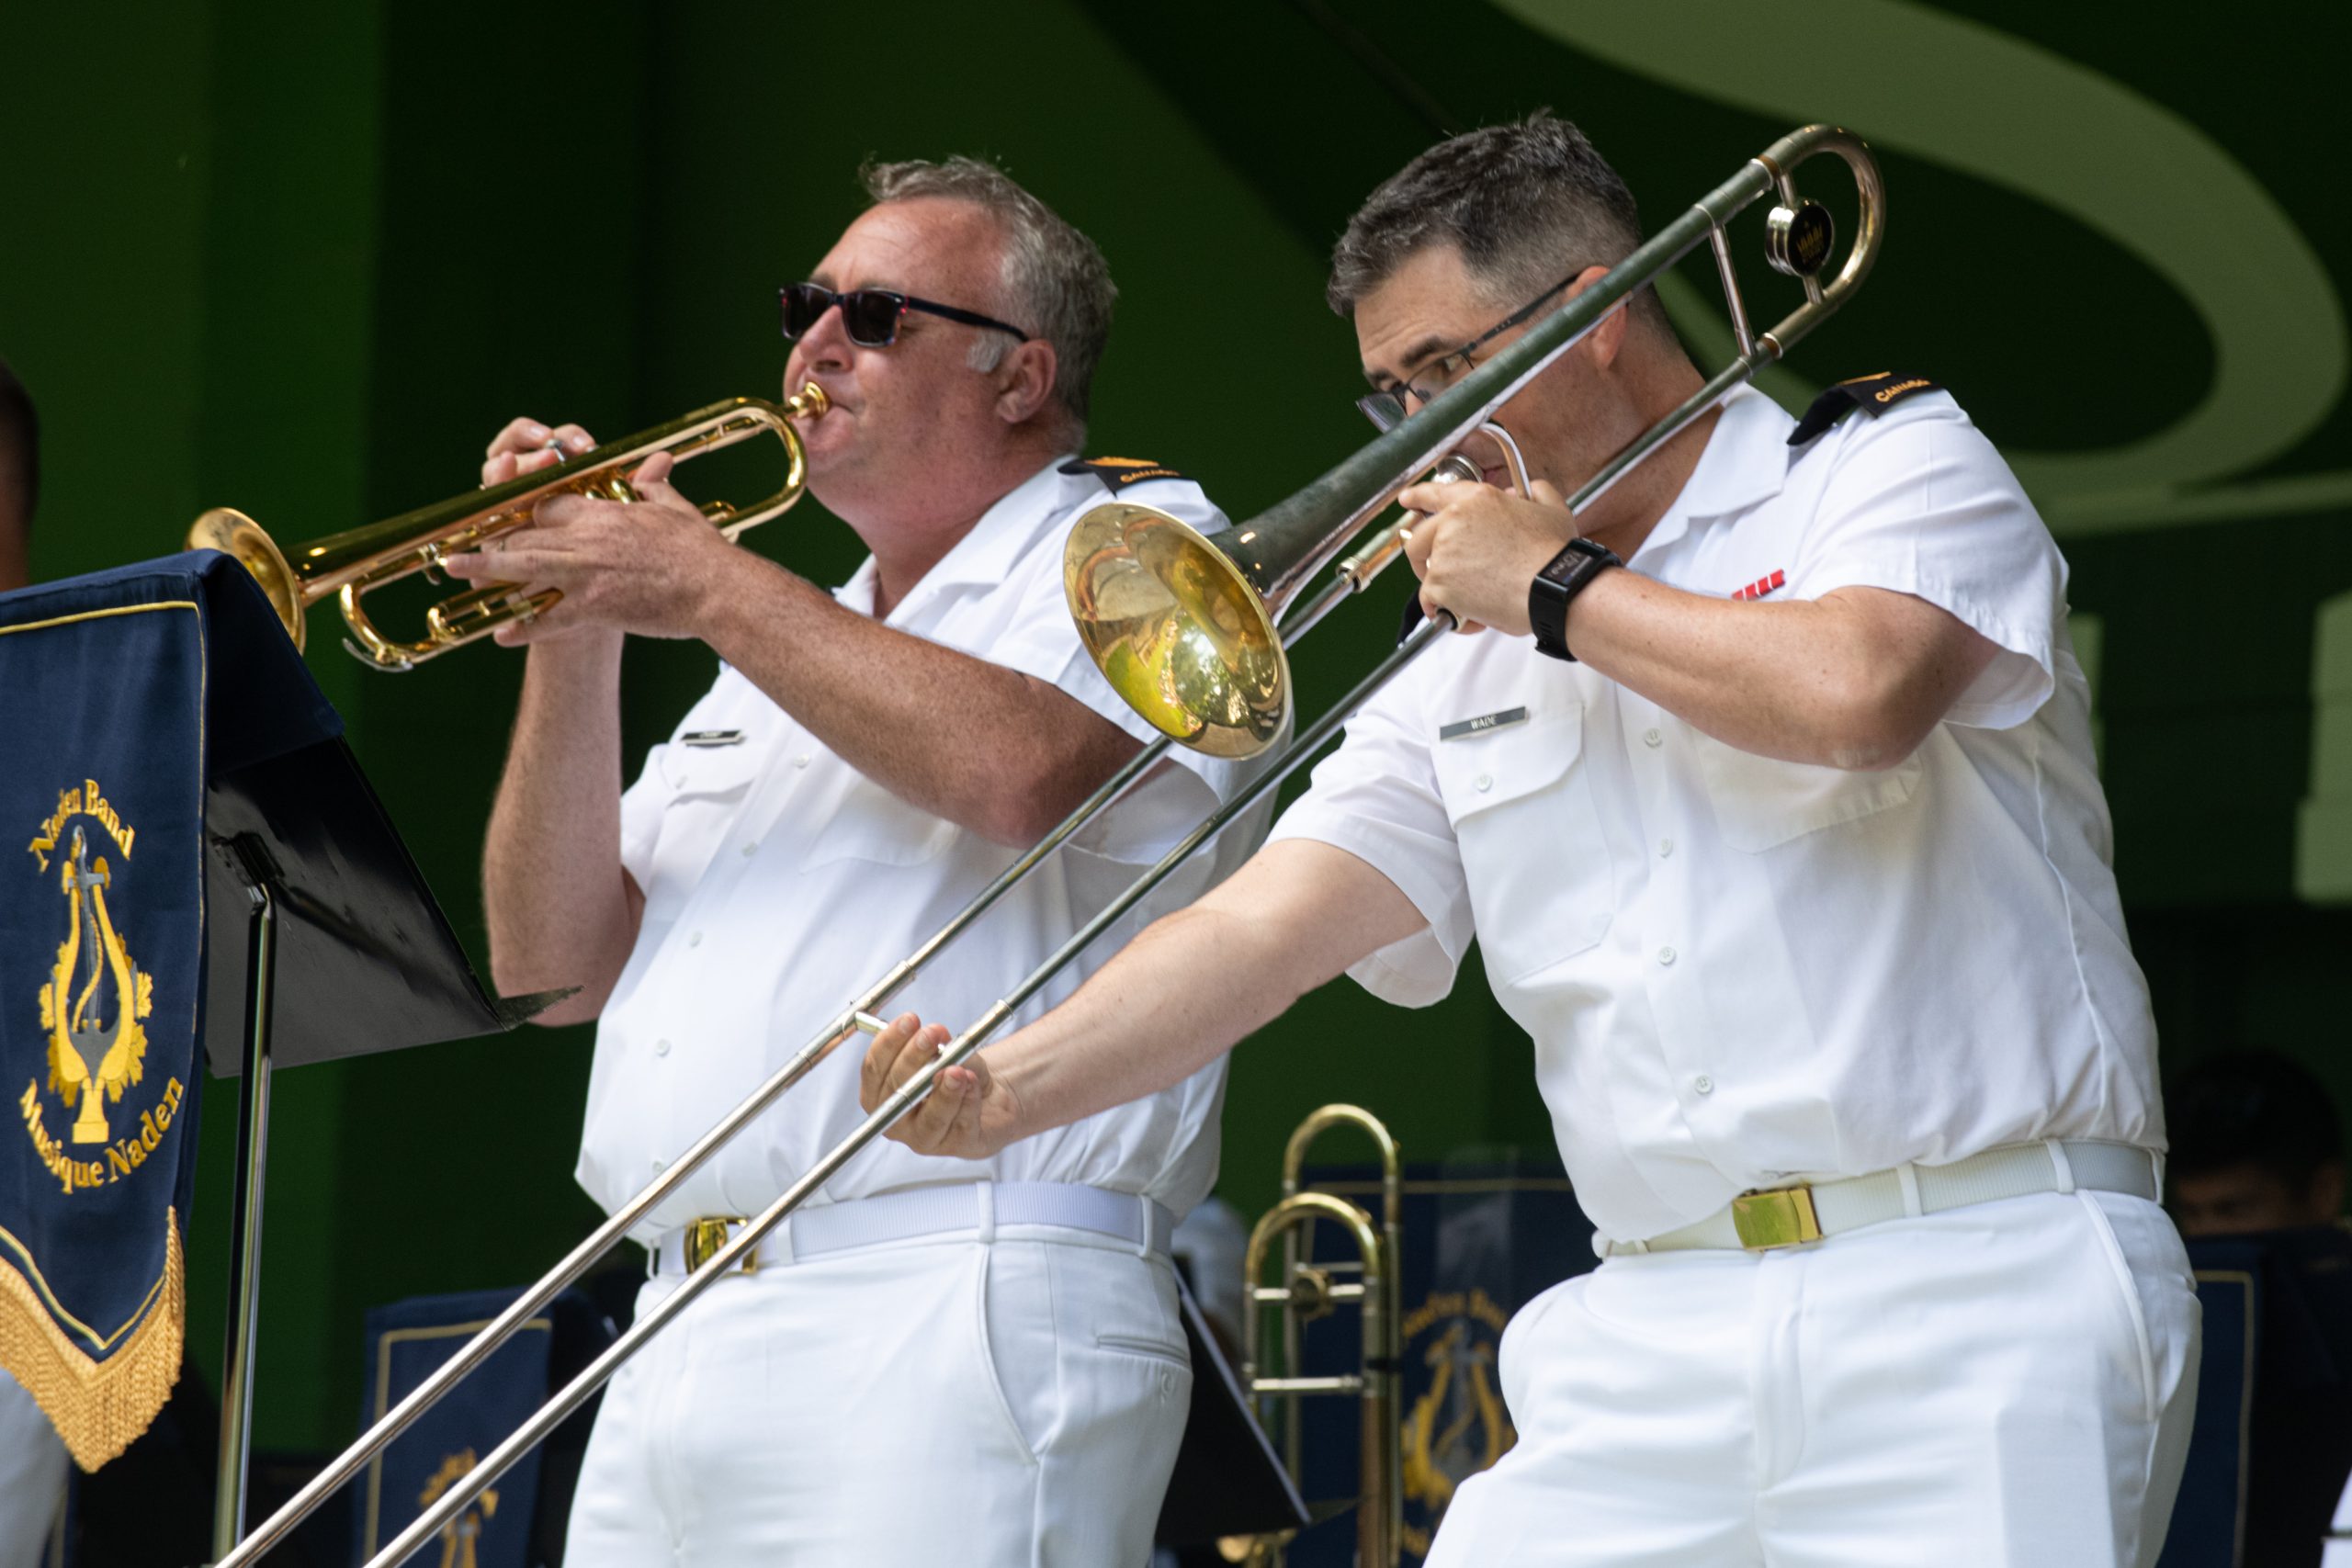 Members of the Naden Band of the Royal Canadian Navy perform for their summer concert at Beacon Hill Park.